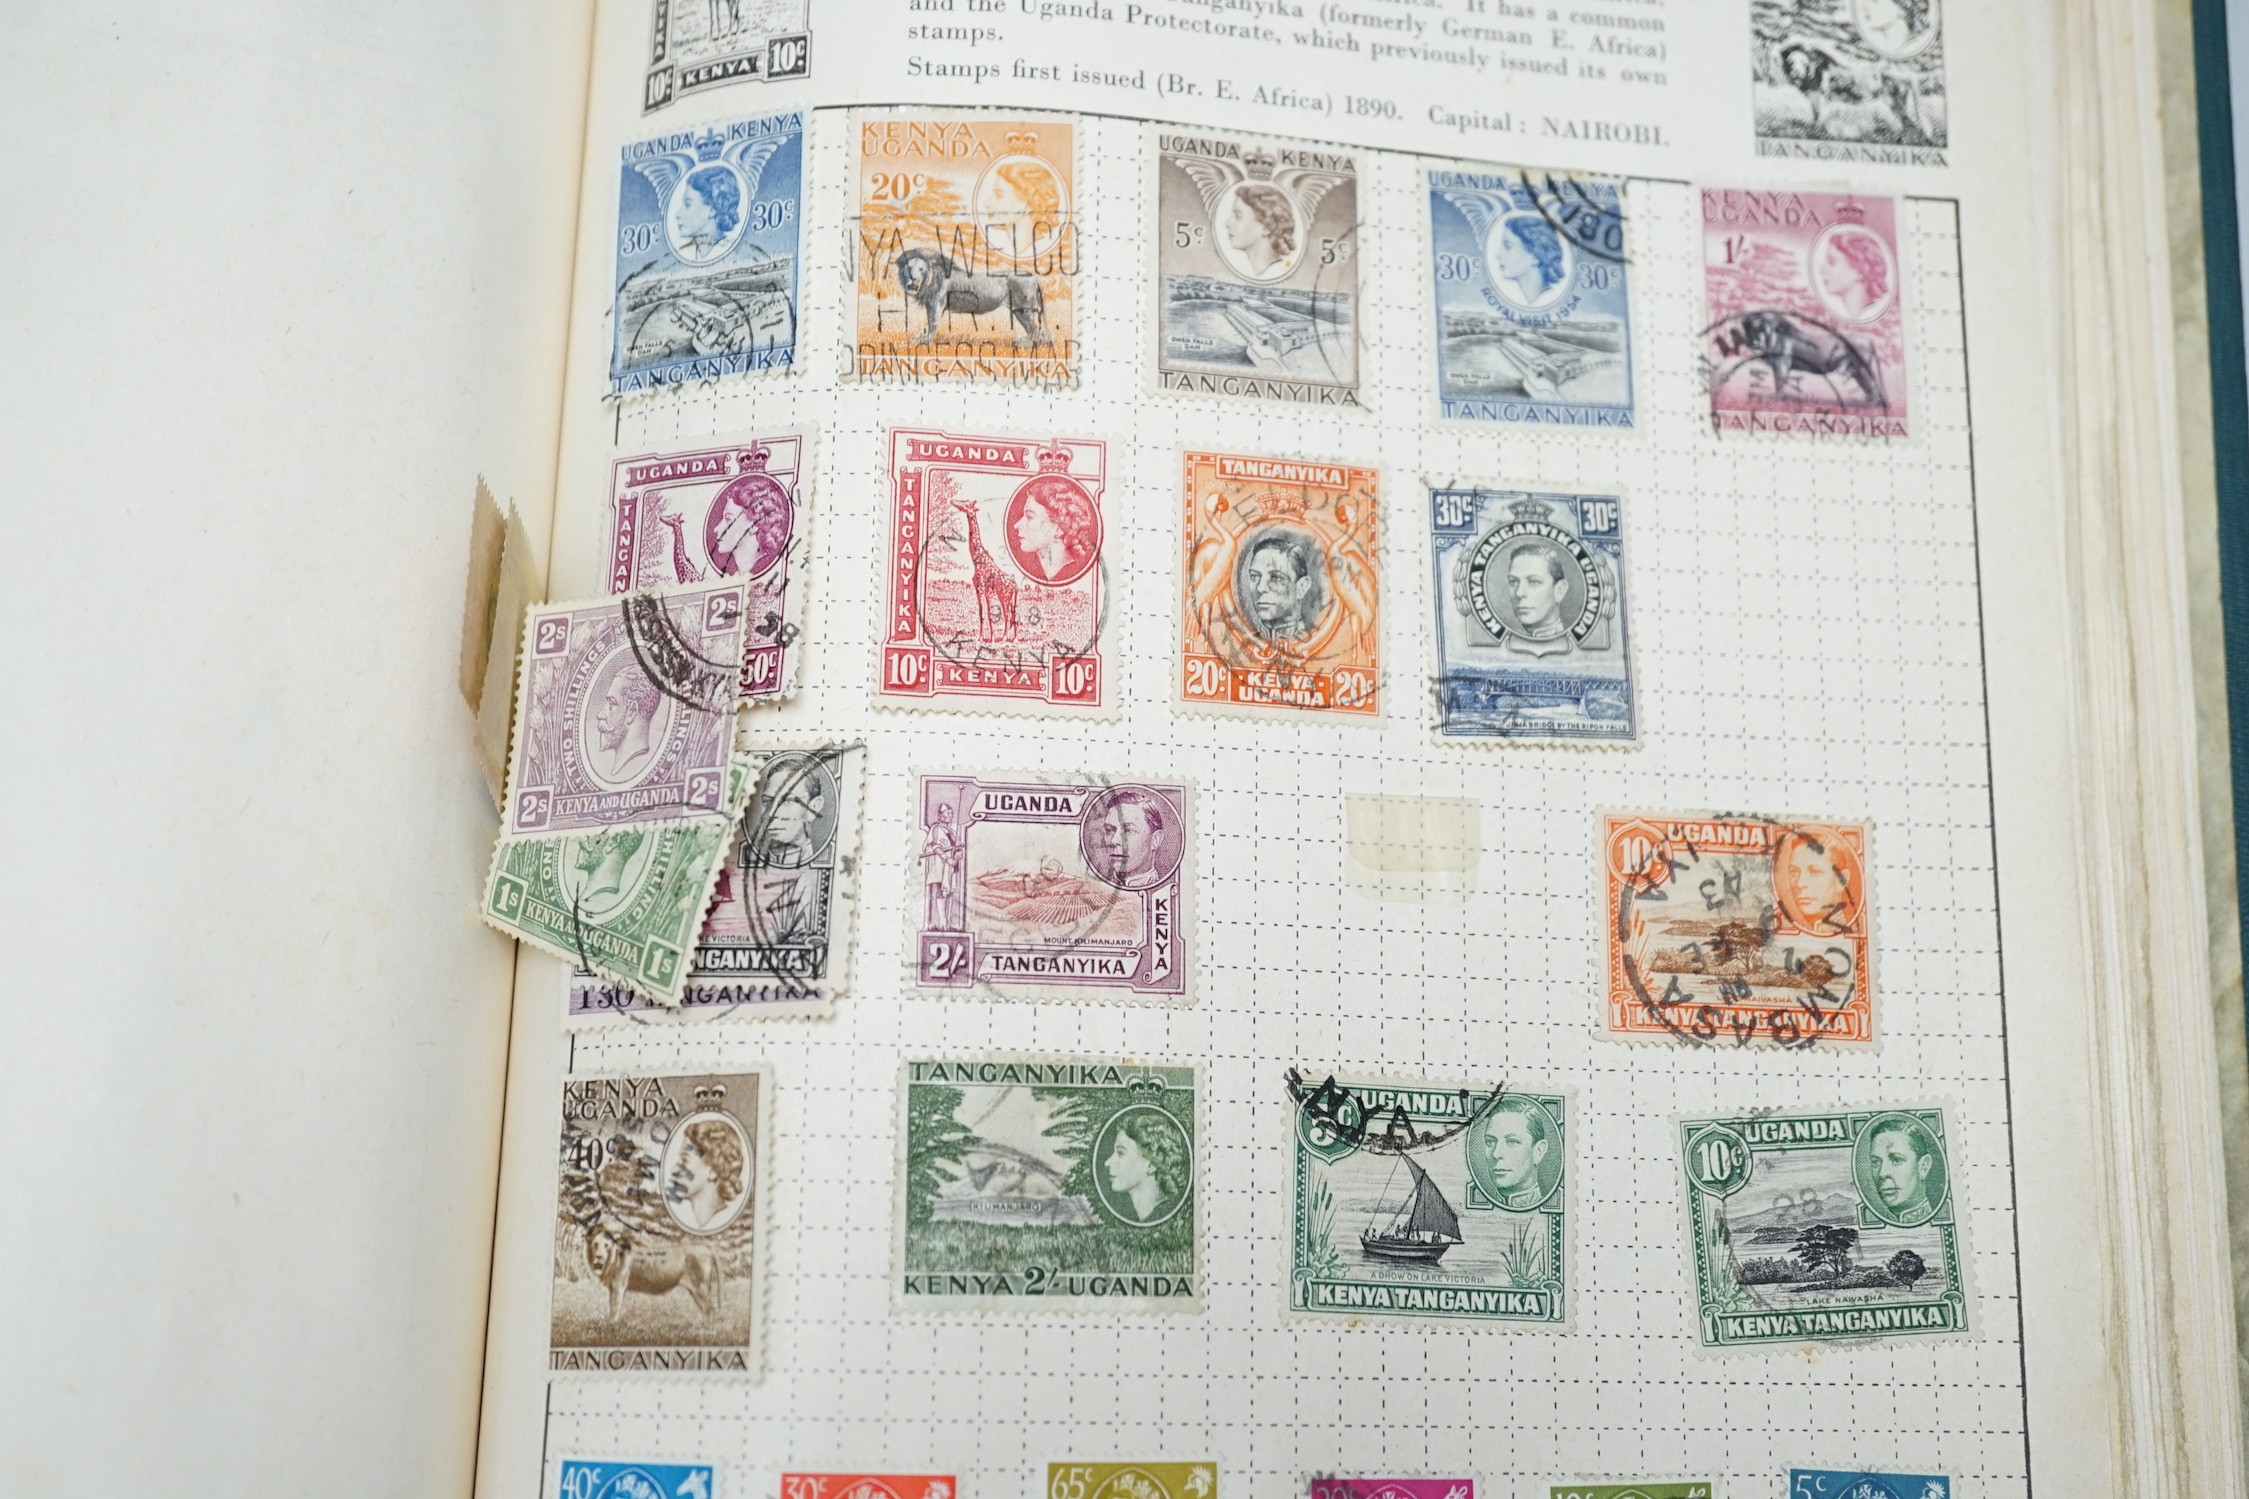 Four albums with Victorian and later Commonwealth and World stamps